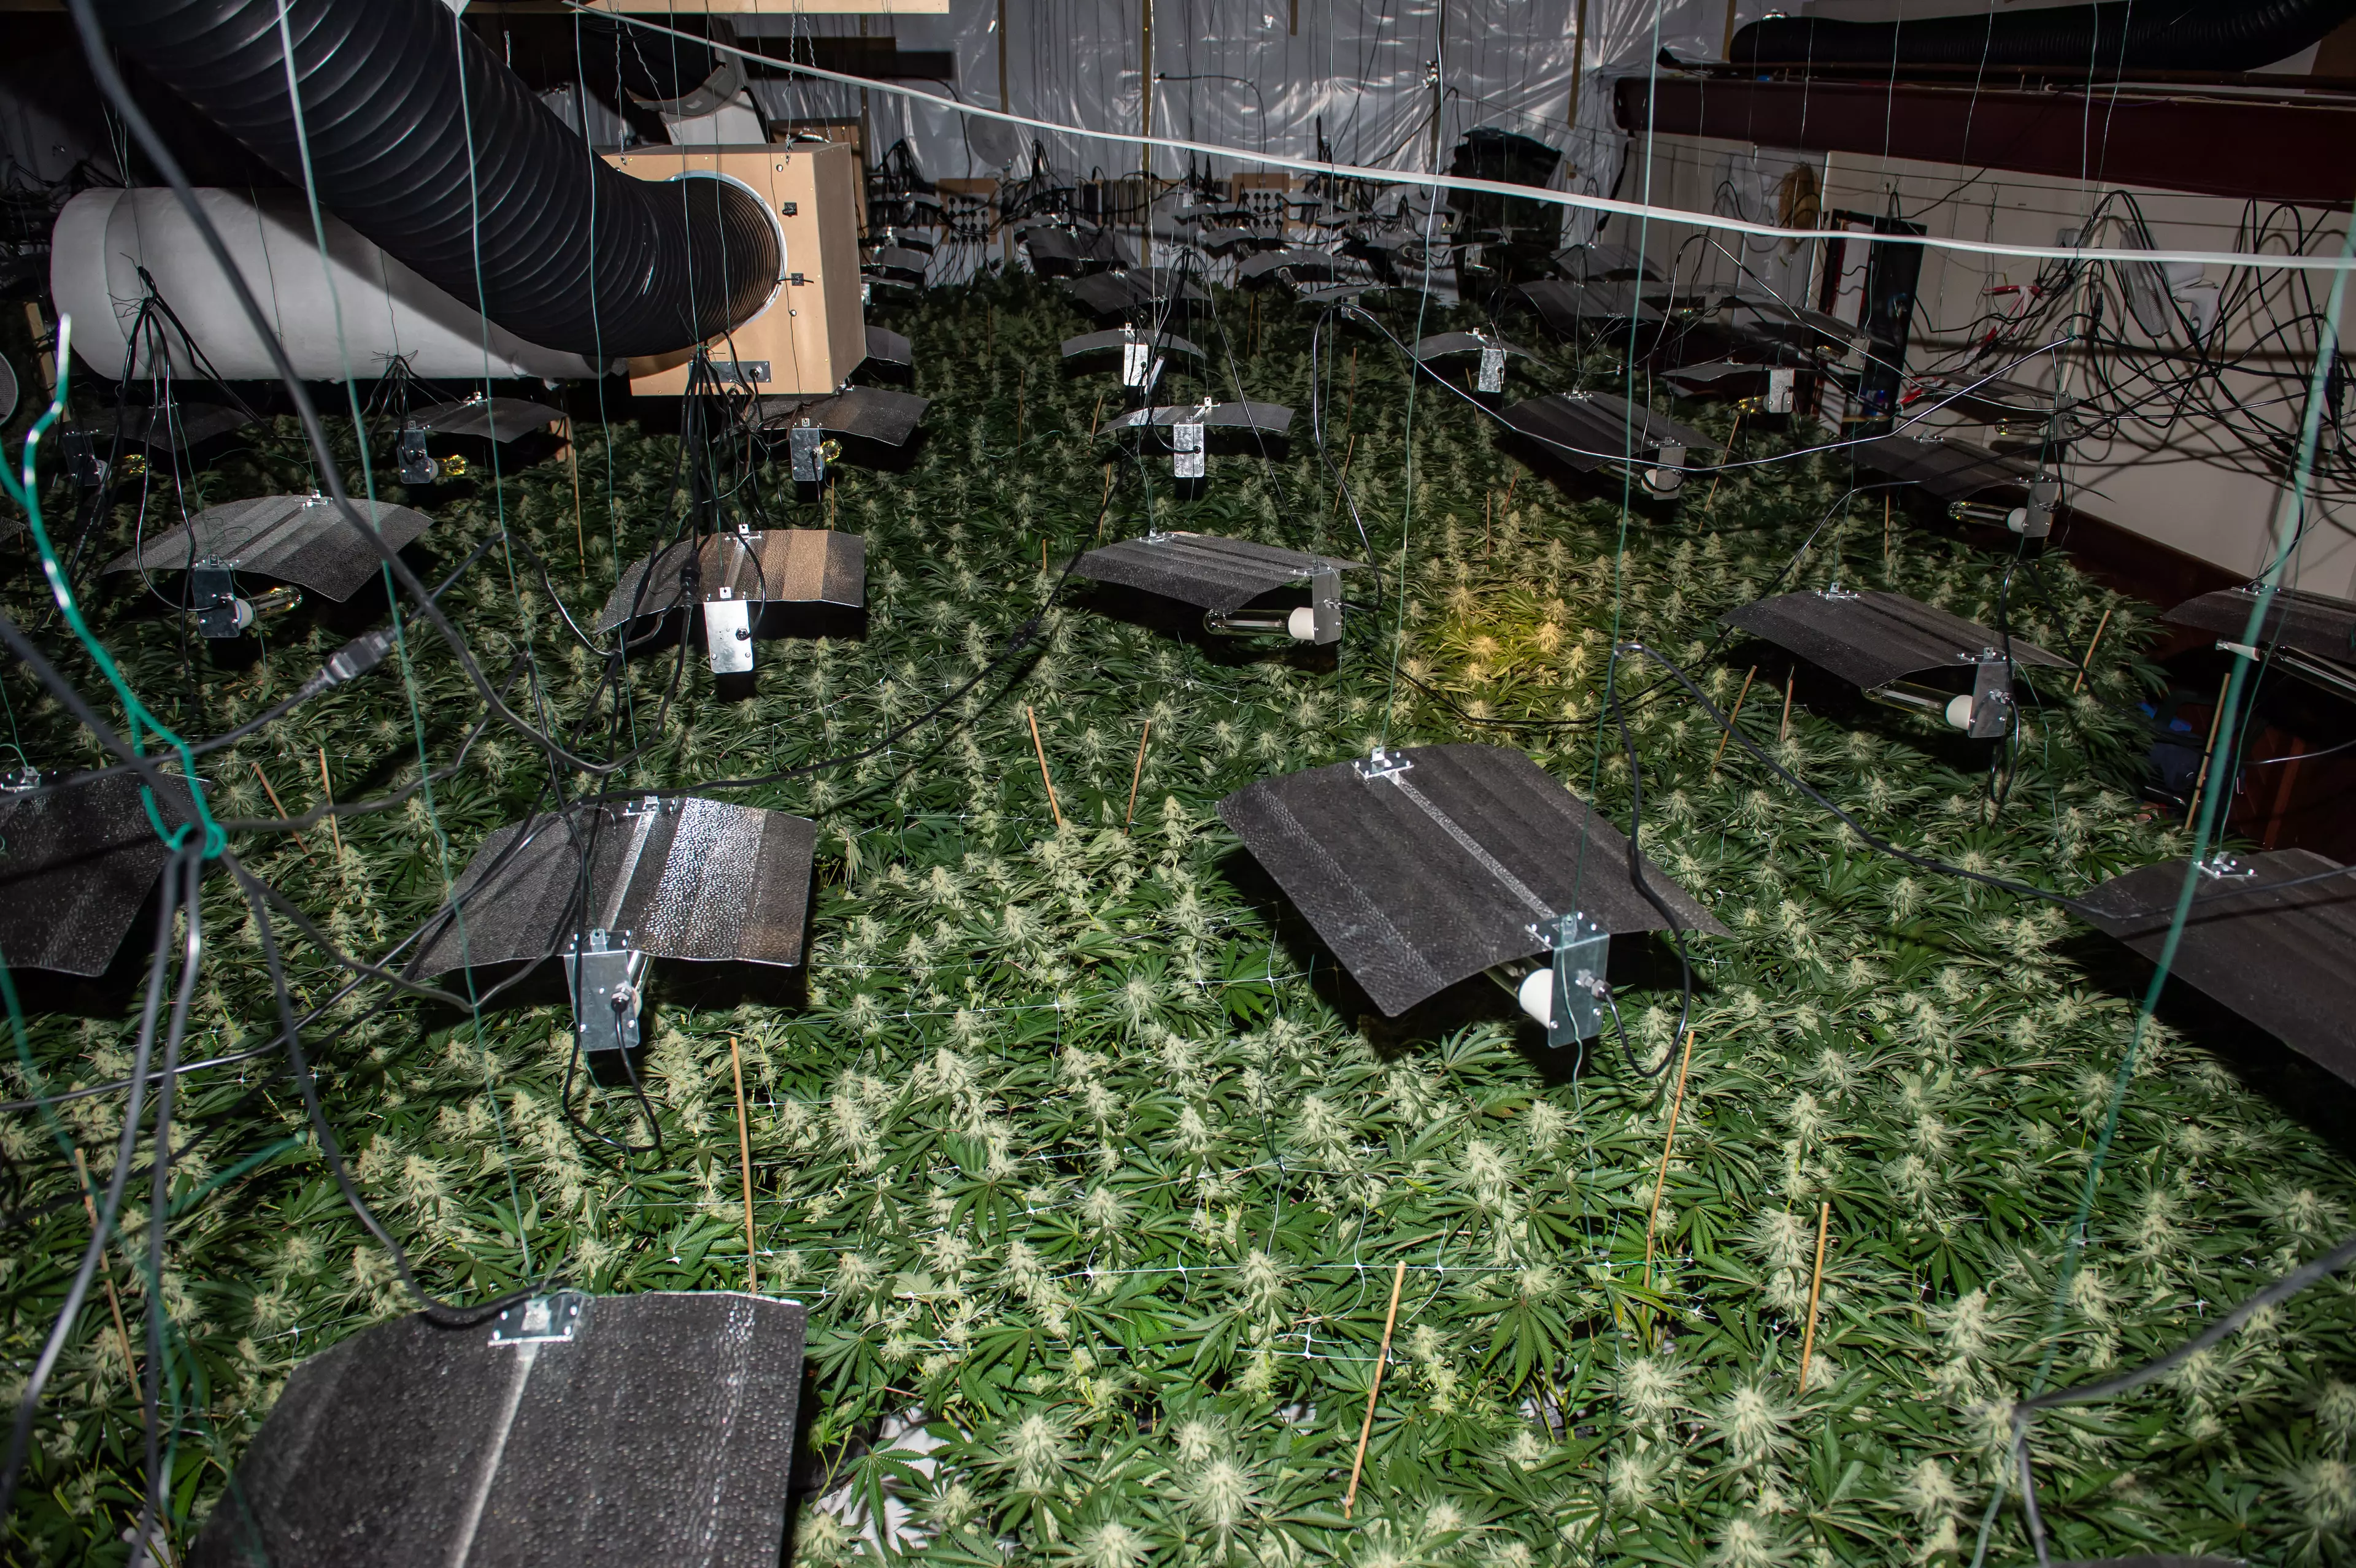 Officers seized 2,000 plants from the derelict building.